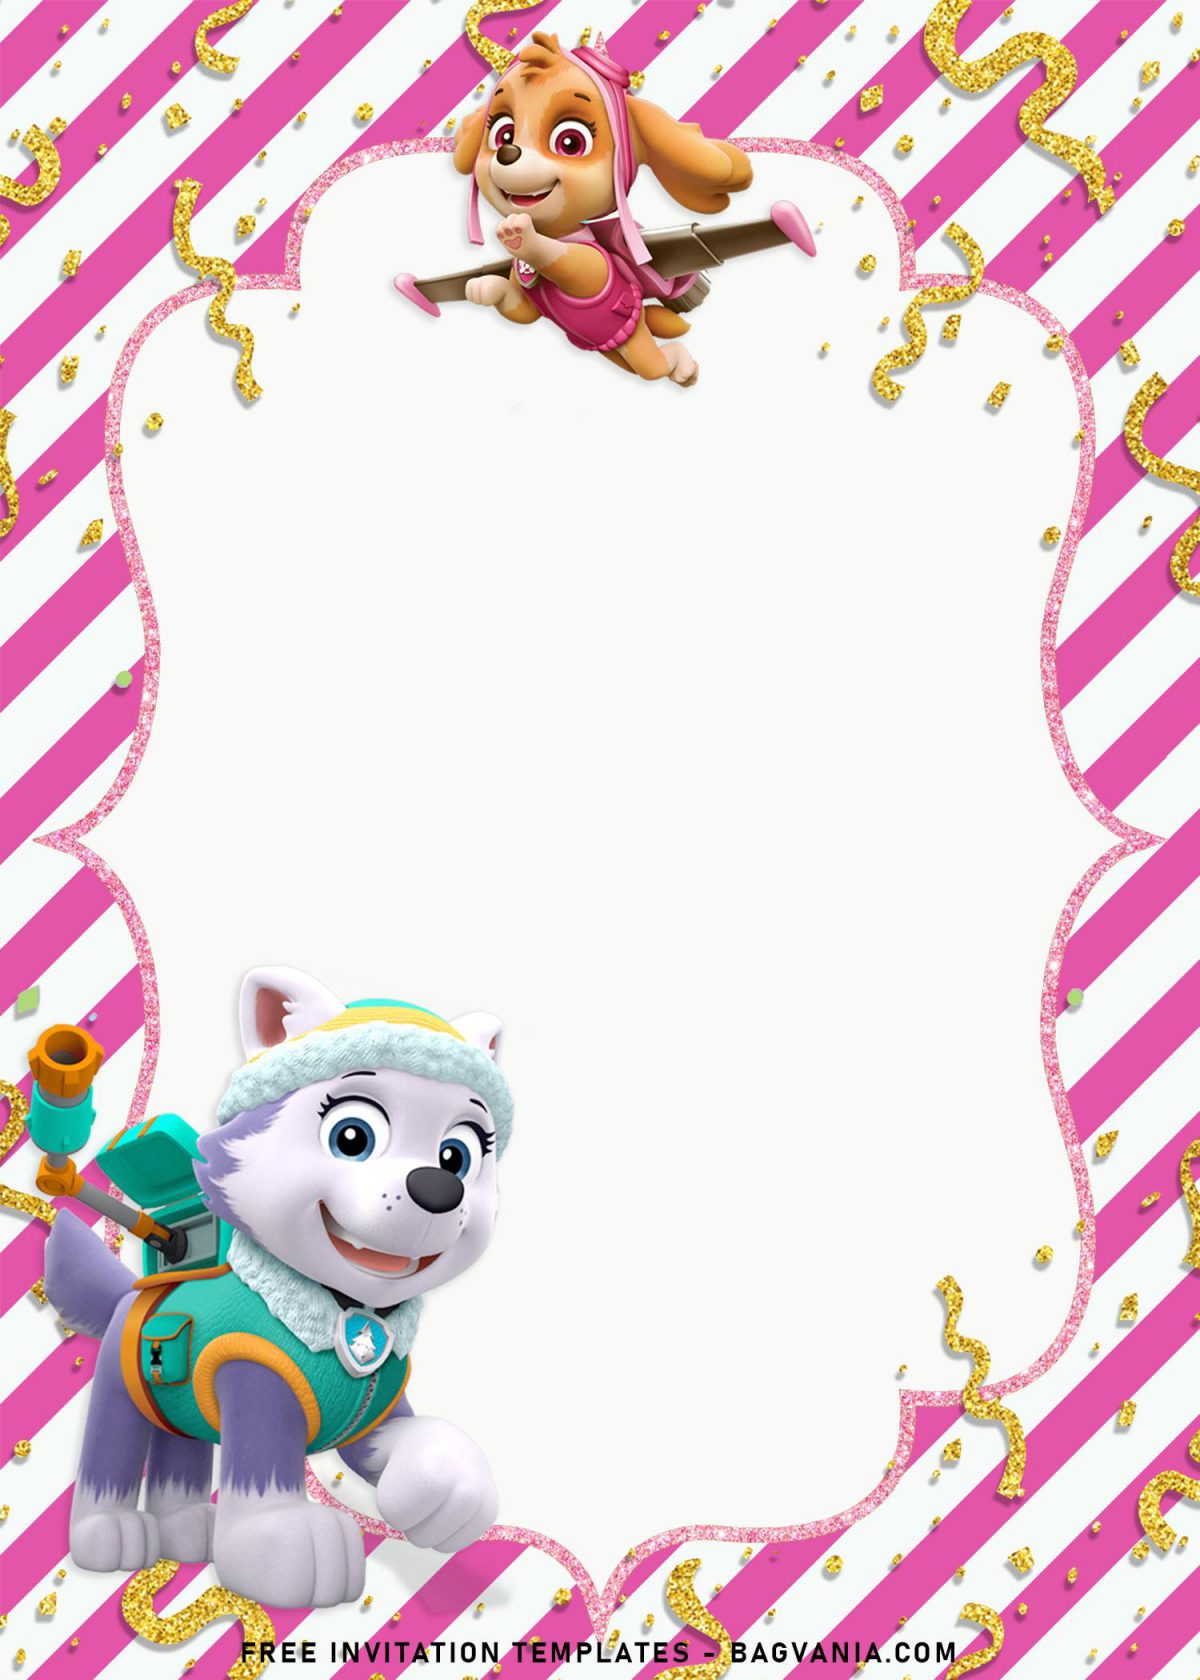 8+ Adorable Skye And Everest Paw Patrol Birthday Invitation Templates and has Skye flying on her jetpack